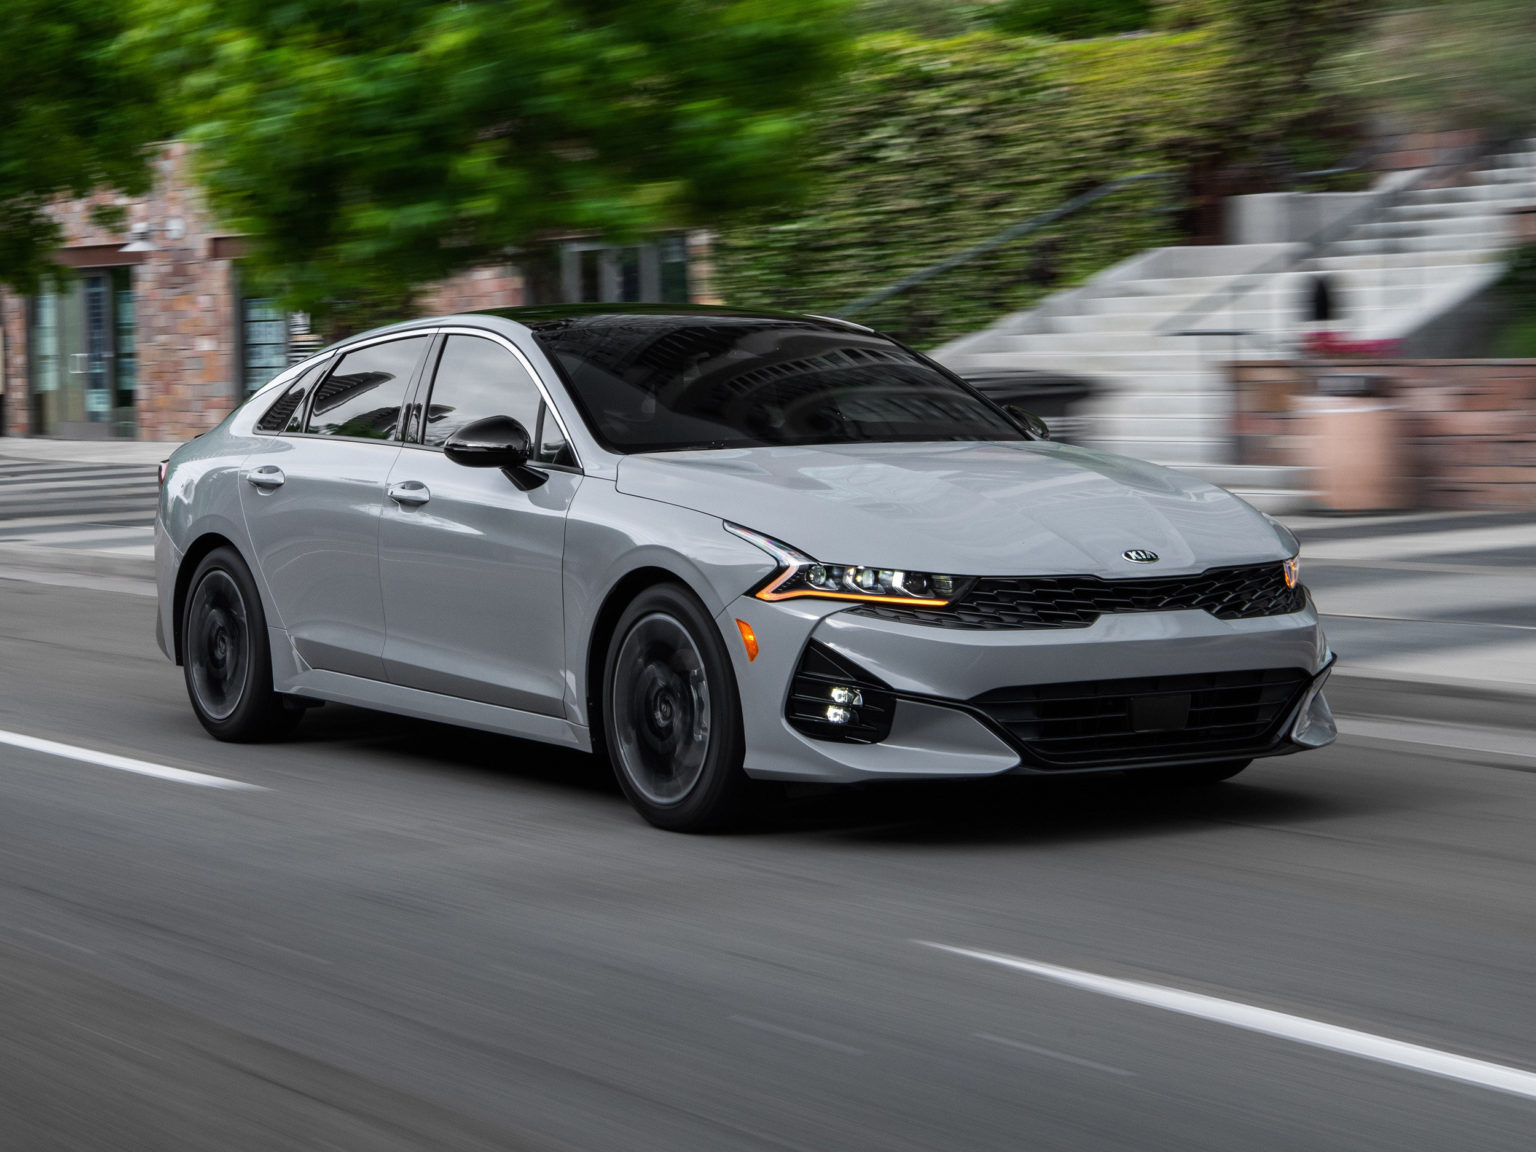 Kia is changing the name of the Optima for the 2021 model year, aligning it with what the car is called overseas.